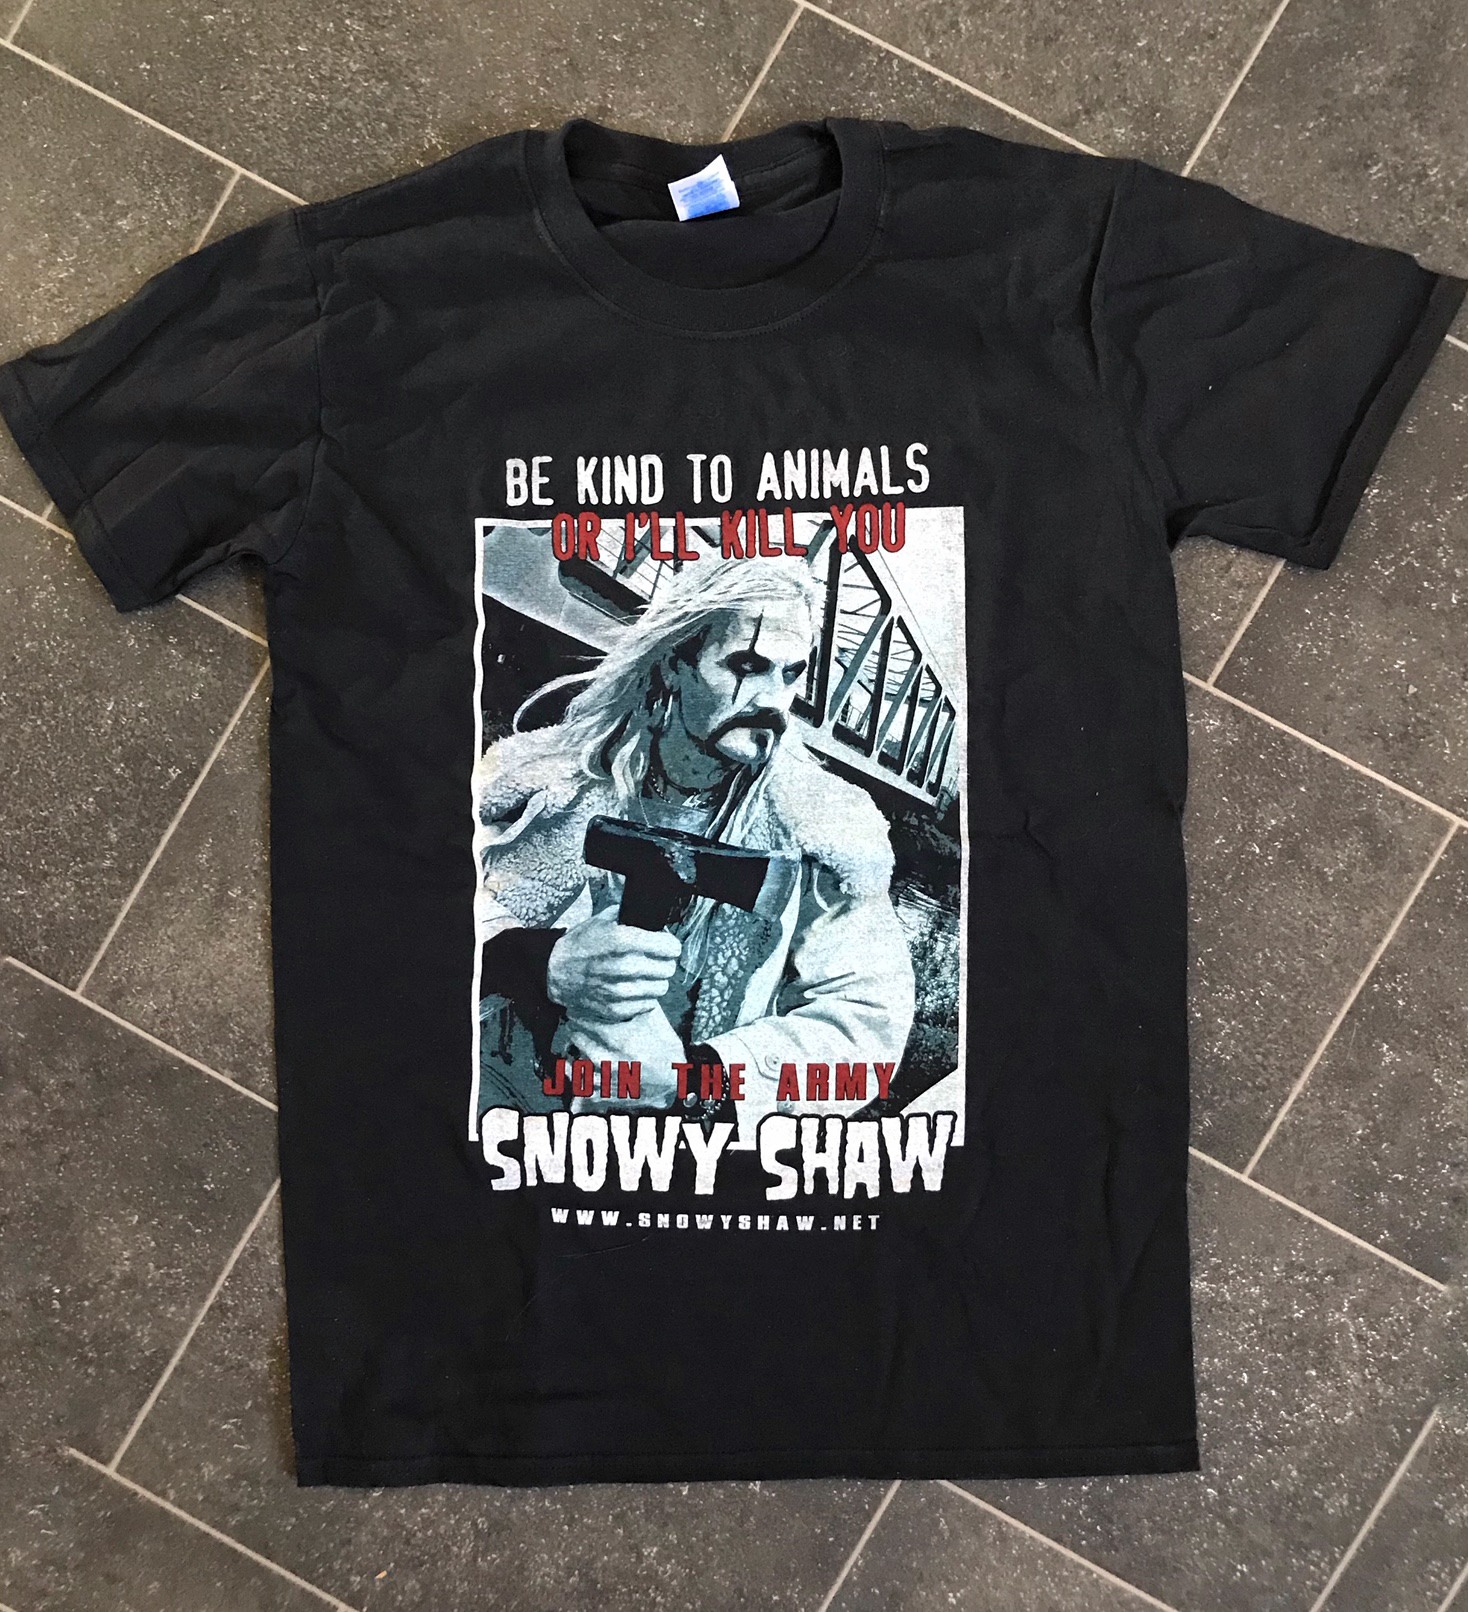 Be kind to animals - Or I'll kill you ! - Snowy Shaw